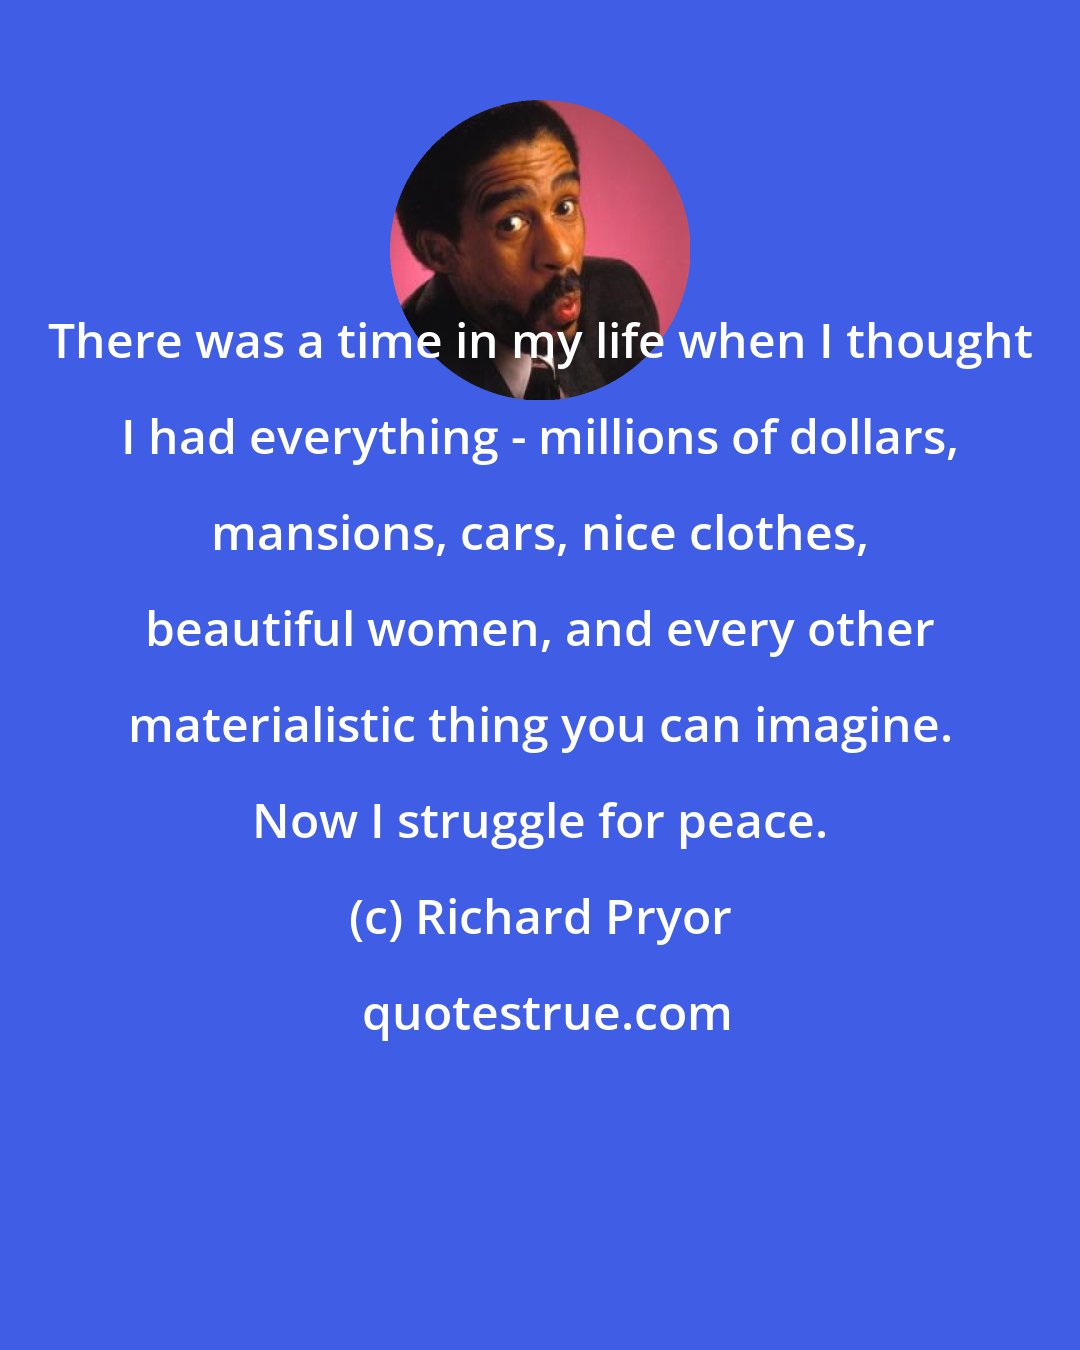 Richard Pryor: There was a time in my life when I thought I had everything - millions of dollars, mansions, cars, nice clothes, beautiful women, and every other materialistic thing you can imagine. Now I struggle for peace.